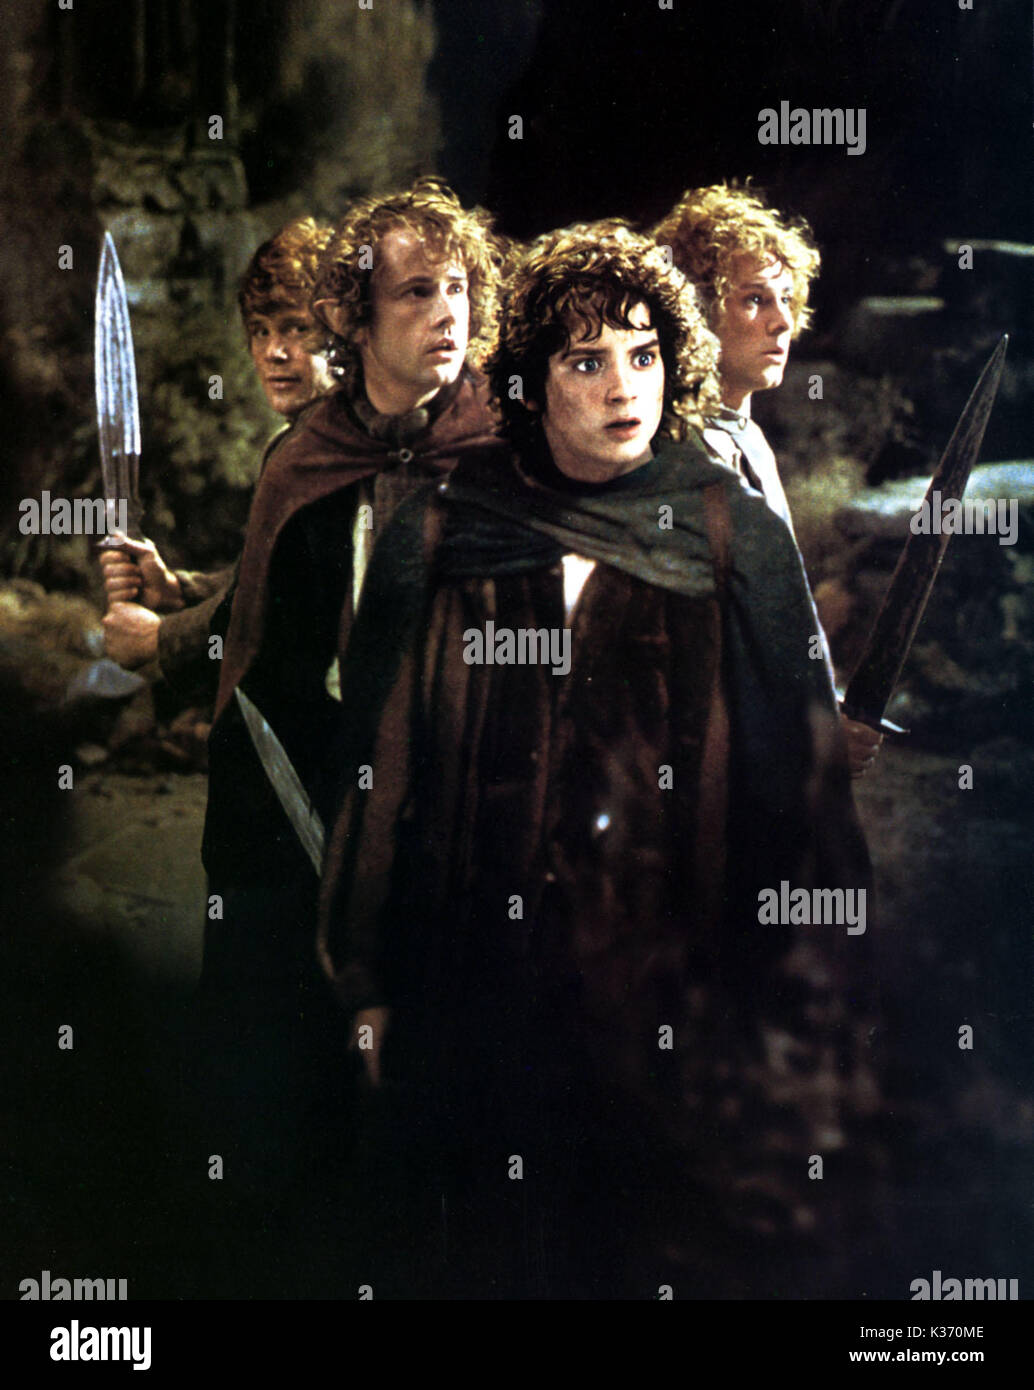 THE LORD OF THE RINGS: THE FELLOWSHIP OF THE RING L-R: SEAN ASTIN as Samwise Gamgees, BILLY BOYD as Pippin, ELIJAH WOOD as Frodo Baggins, DOMINIC MONAGHAN as Merry YOU MUST CREDIT: NEW LINE CINEMA Stock Photo